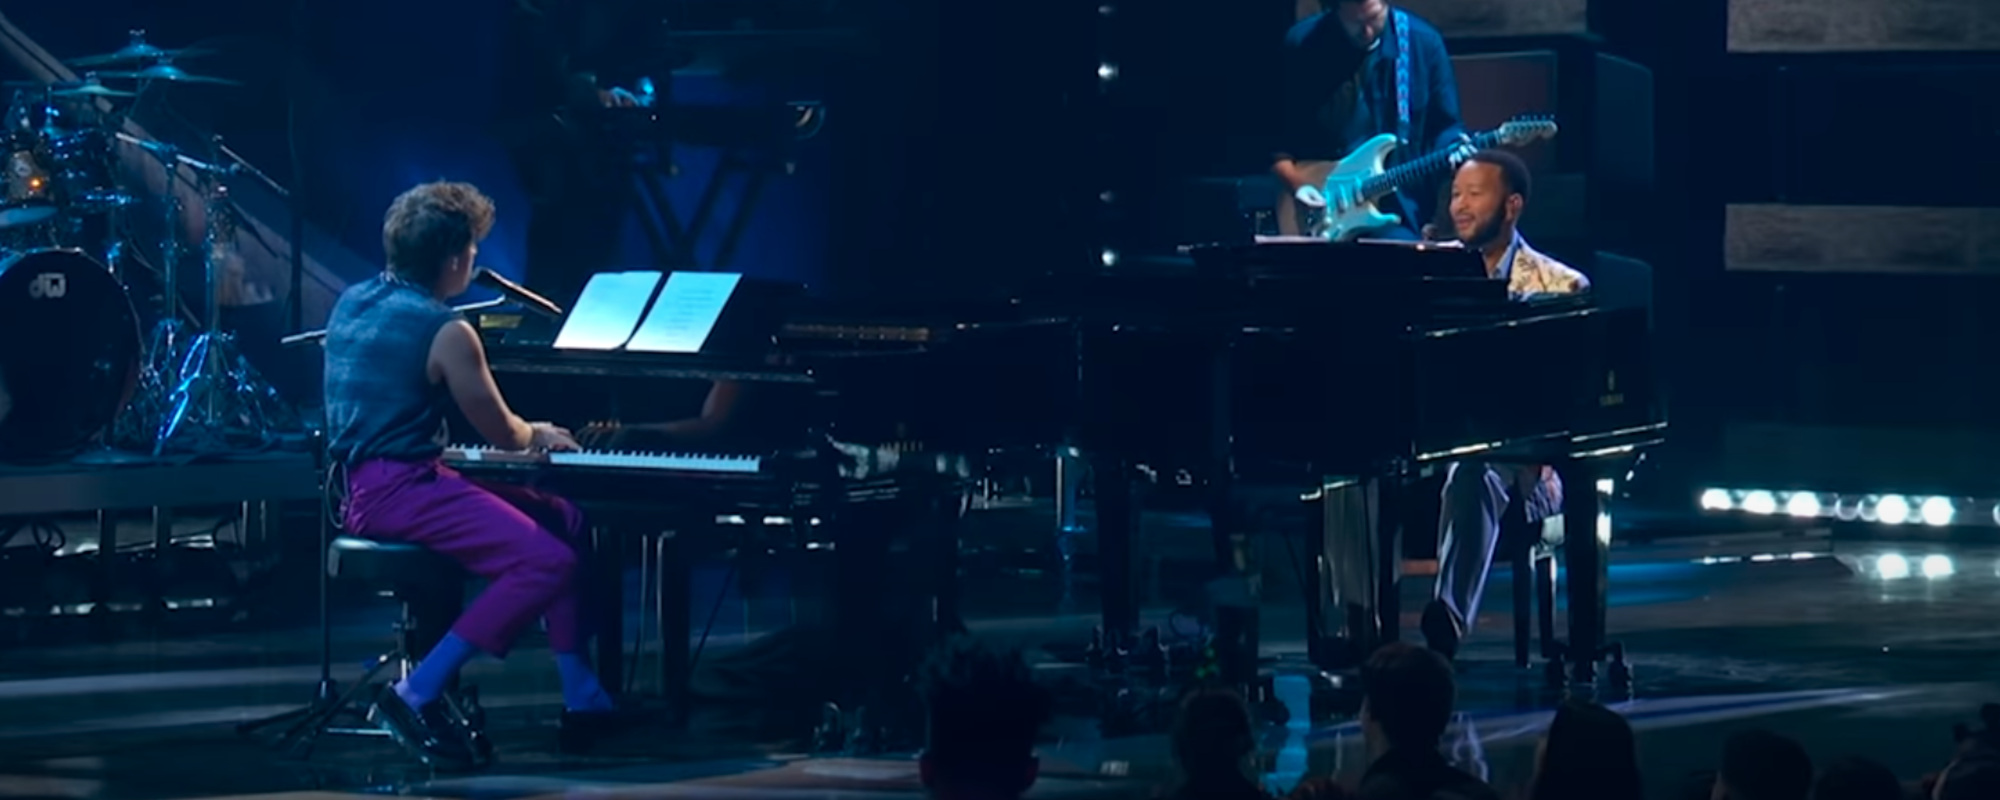 Charlie Puth & John Legend Perform on Dueling Pianos at iHeartRadio Music Awards, Tease New Collab